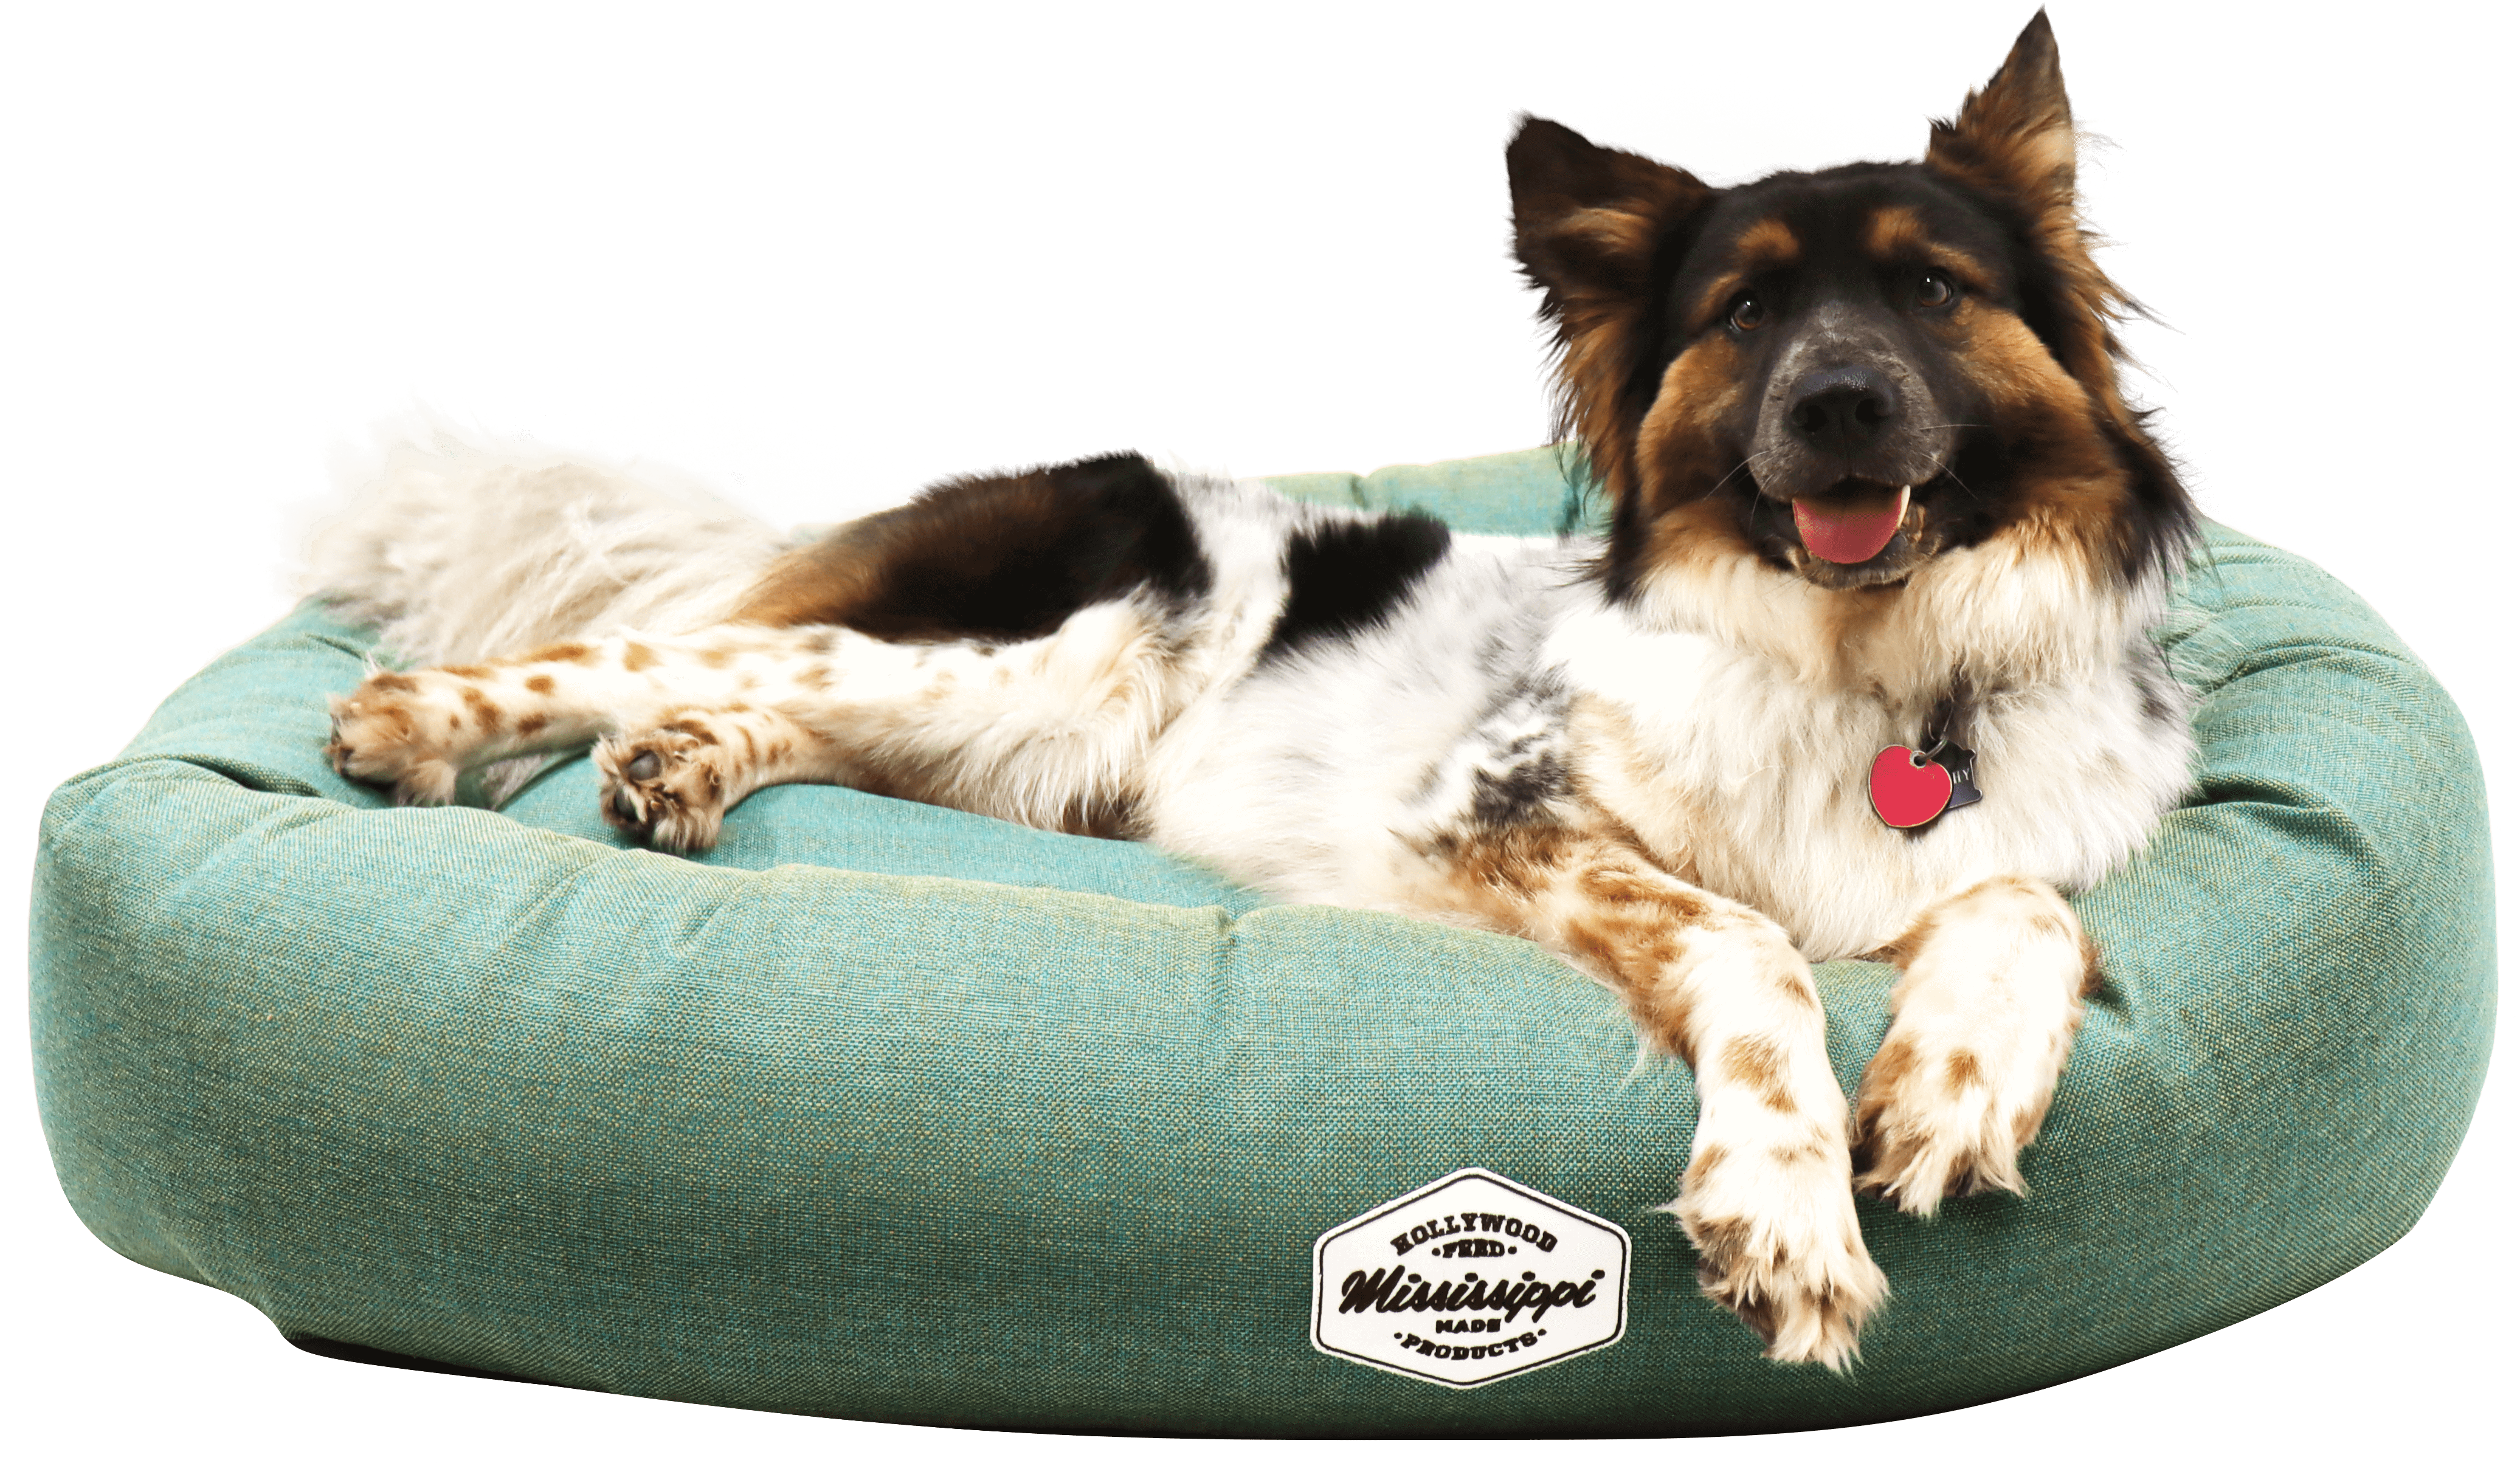 Dog laying in hollywood feed mississippi made donut bed - solid green